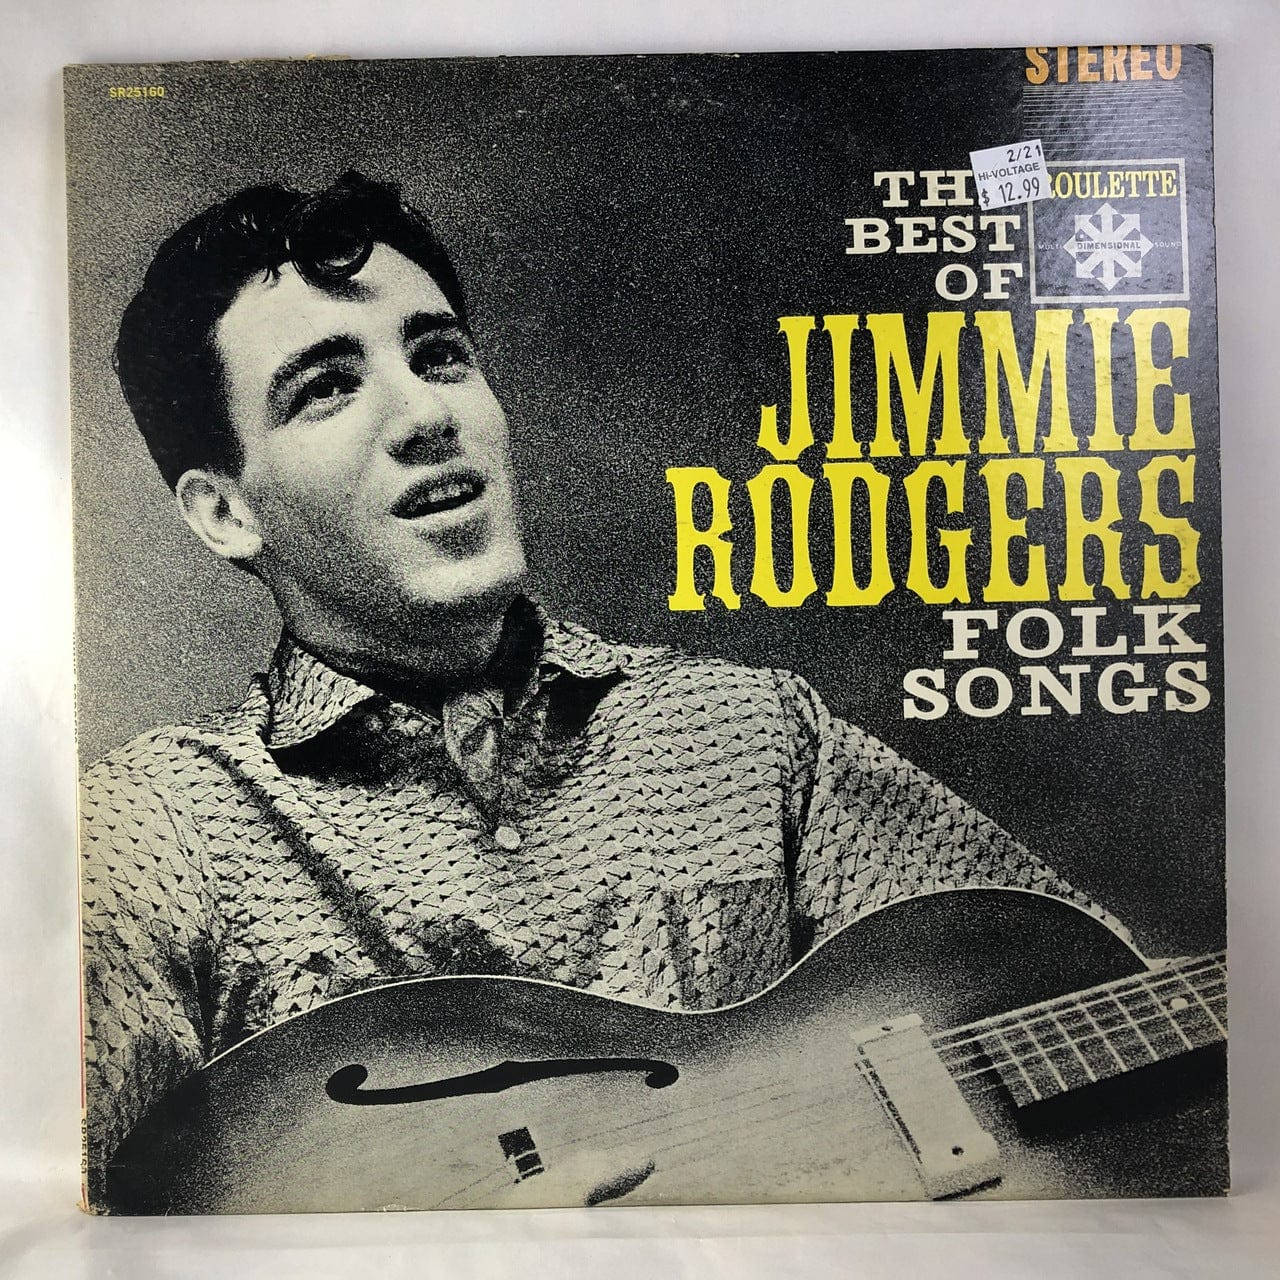 The Best Of Jimmie Rodgers Album Cover Wallpaper